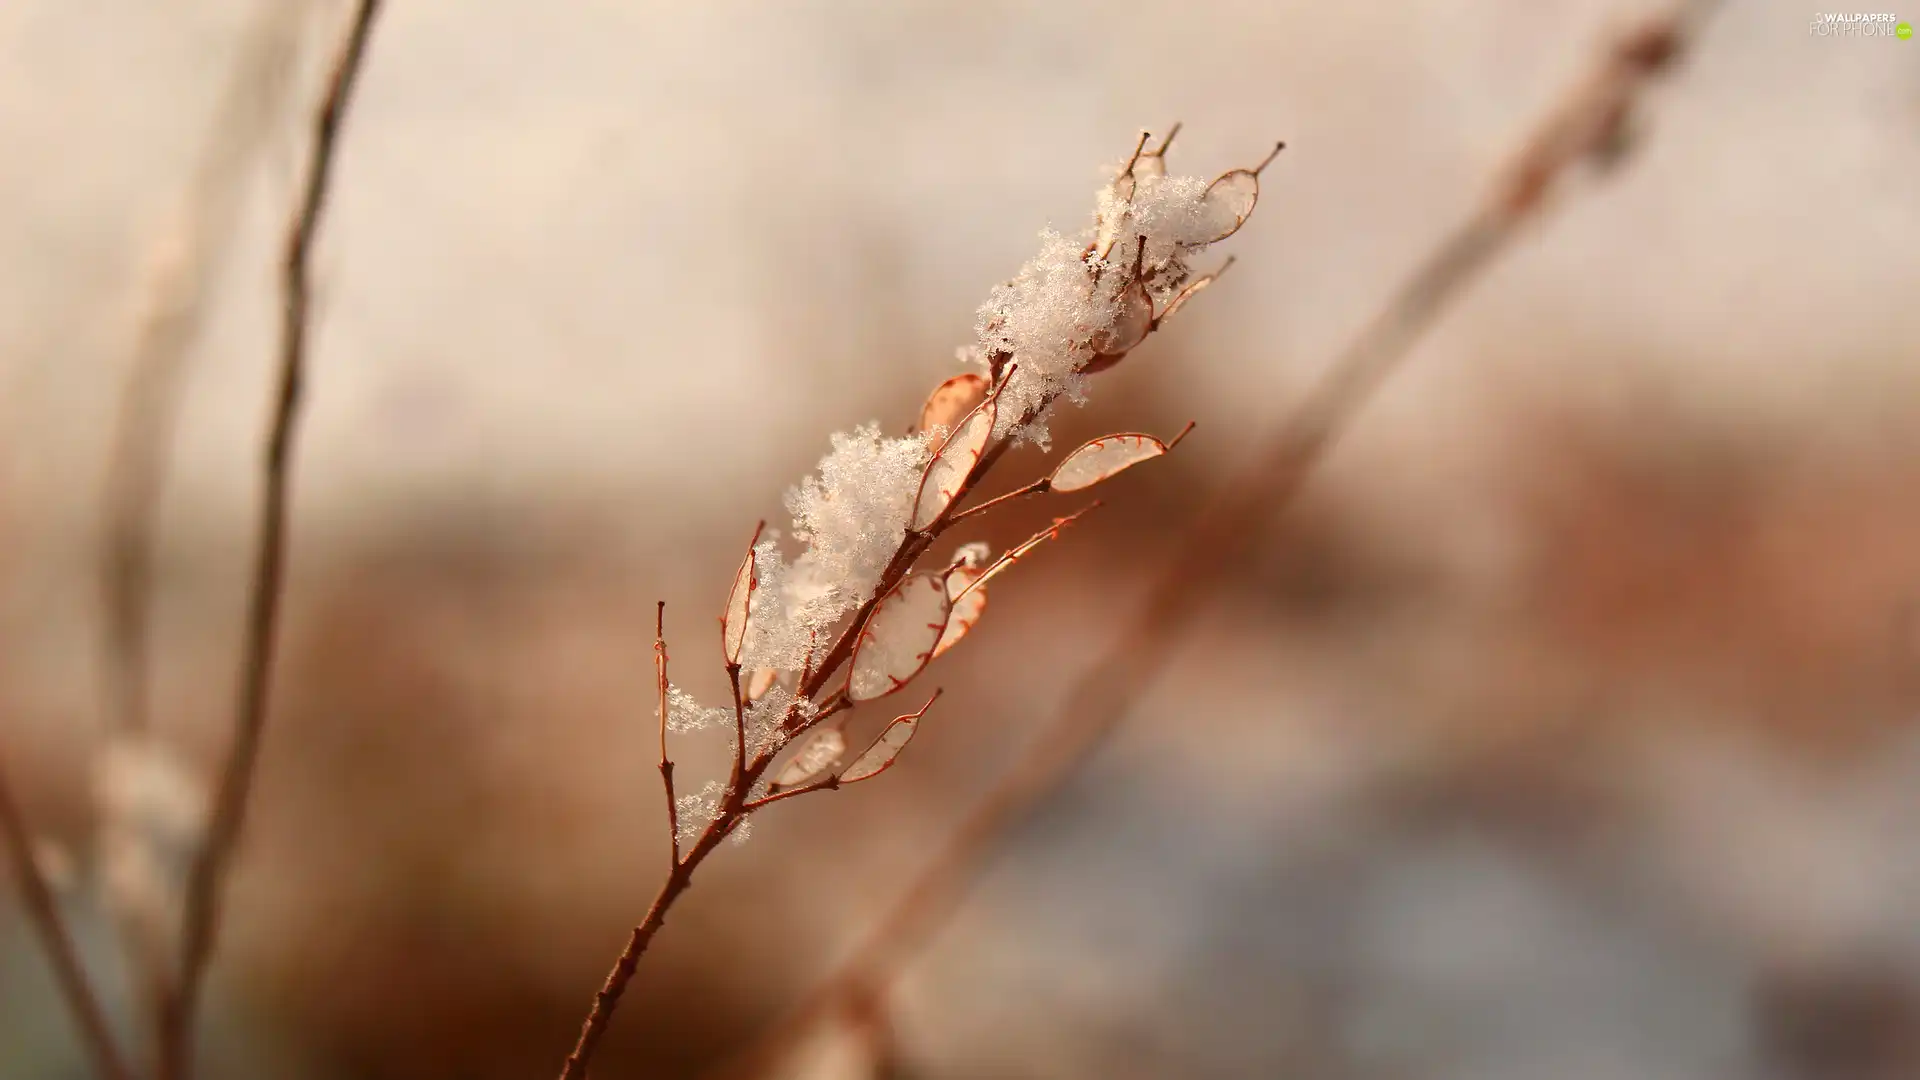 rapprochement, blurry background, plant, snow, withered